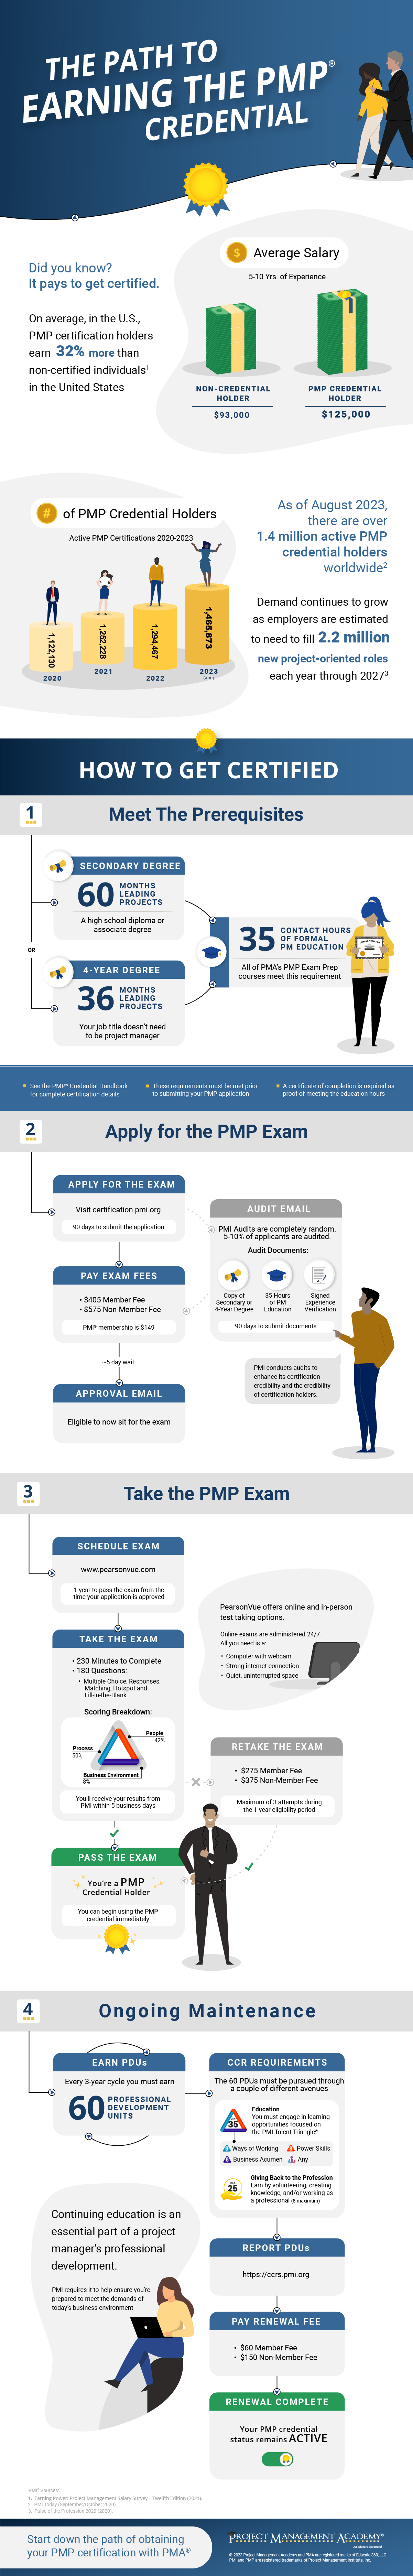 The Path to Earning the PMP Certification Infographic